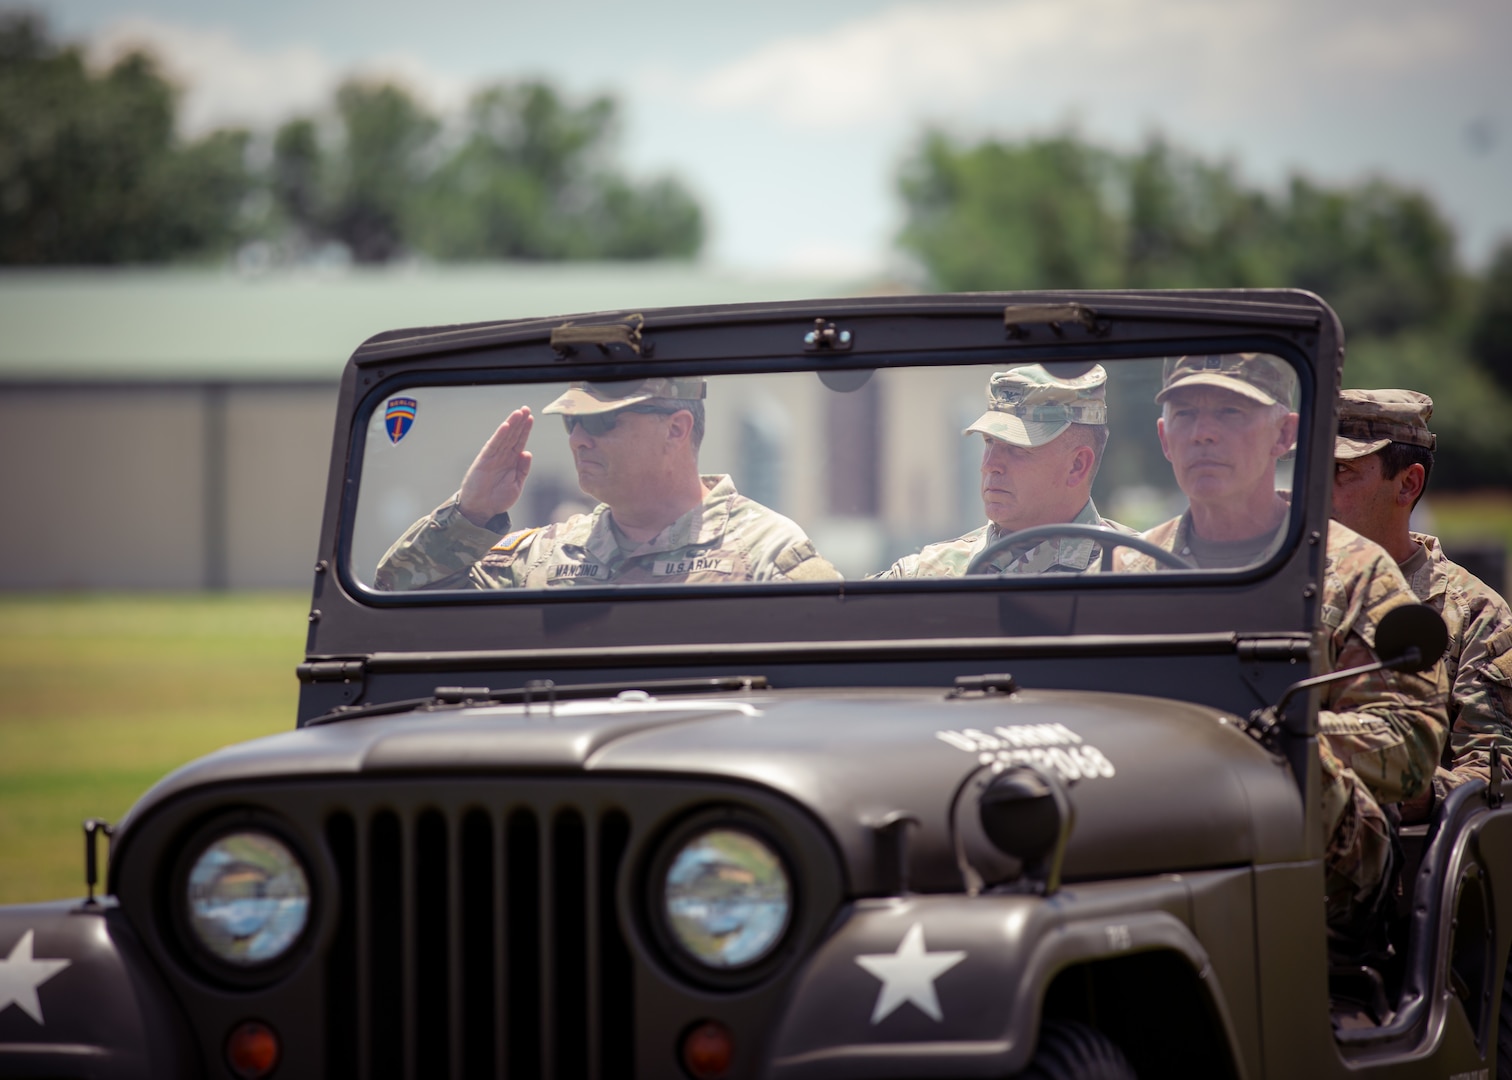 (From left) Maj. Gen. Thomas H. Mancino, adjutant general for Oklahoma, Col. Andrew Ballengr, outgoing commander of the 45th Infantry Brigade Combat Team, Sgt. Maj. Joe Van Ausdall, operations sergeant major for the 45th IBCT, and Col. Khalid Hussein, incoming commander of the 45th IBCT, Oklahoma Army National Guard, conduct an inspection of ranks during a change of command ceremony held at Camp Gruber Training Center near Braggs, Oklahoma, June 11, 2024. Ballenger commanded the 45th IBCT since August 2022, leading the brigade through numerous deployments and training exercises, enhancing its readiness and operational capabilities. (Oklahoma National Guard photo by Cpl. Danielle Rayon)